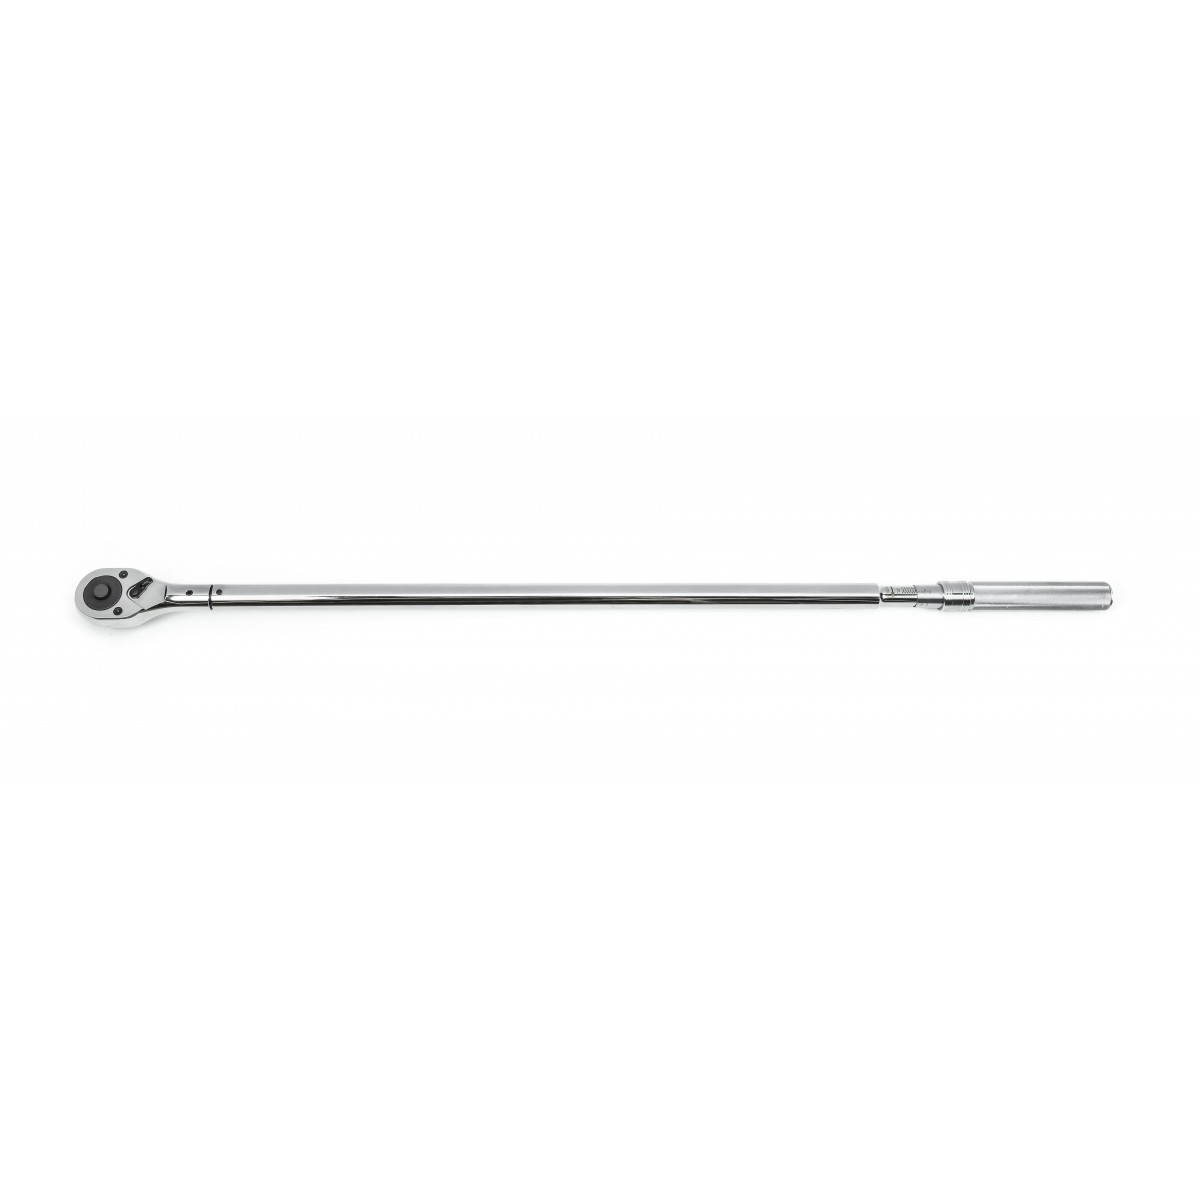 OpenHouse 1 in. Drive Micrometer Torque Wrench, 150-700 ft.-lbs